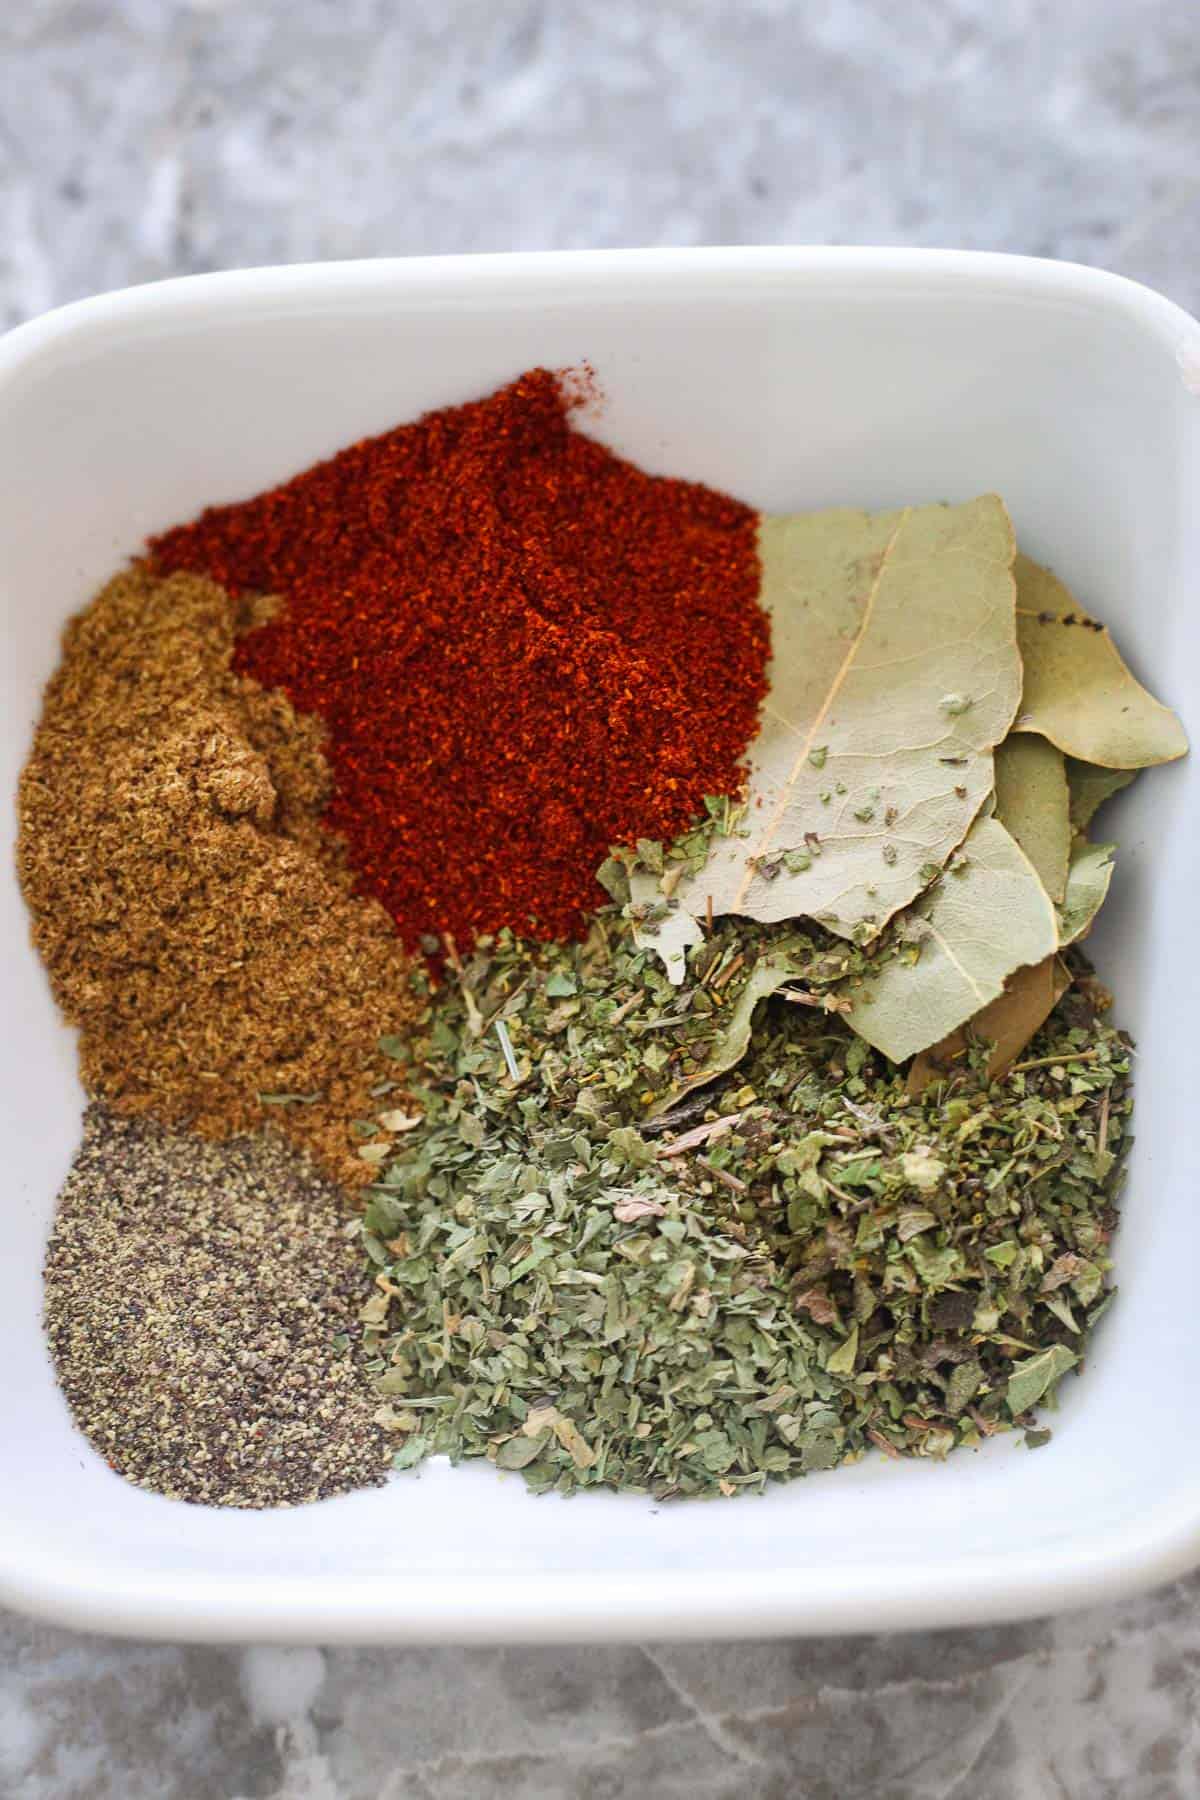 Seasonings for pinto beans soup in one square bowl: bay leaves, smoked paprika, cumin, black pepper, parsley and oregano.